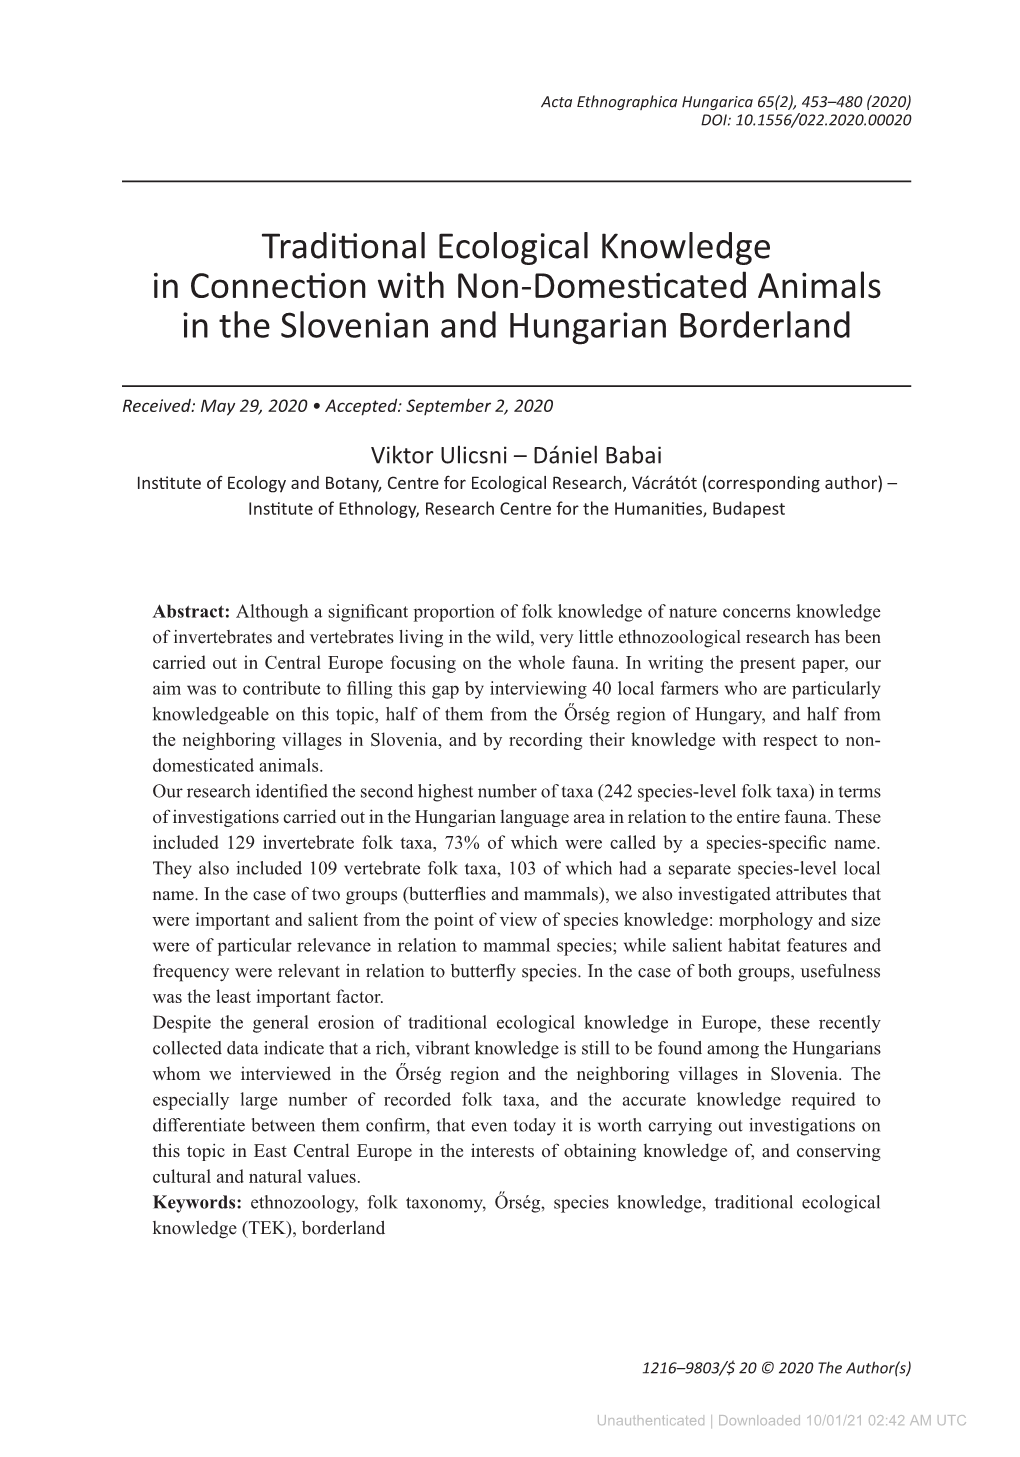 Traditional Ecological Knowledge in Connection with Non-Domesticated Animals in the Slovenian and Hungarian Borderland